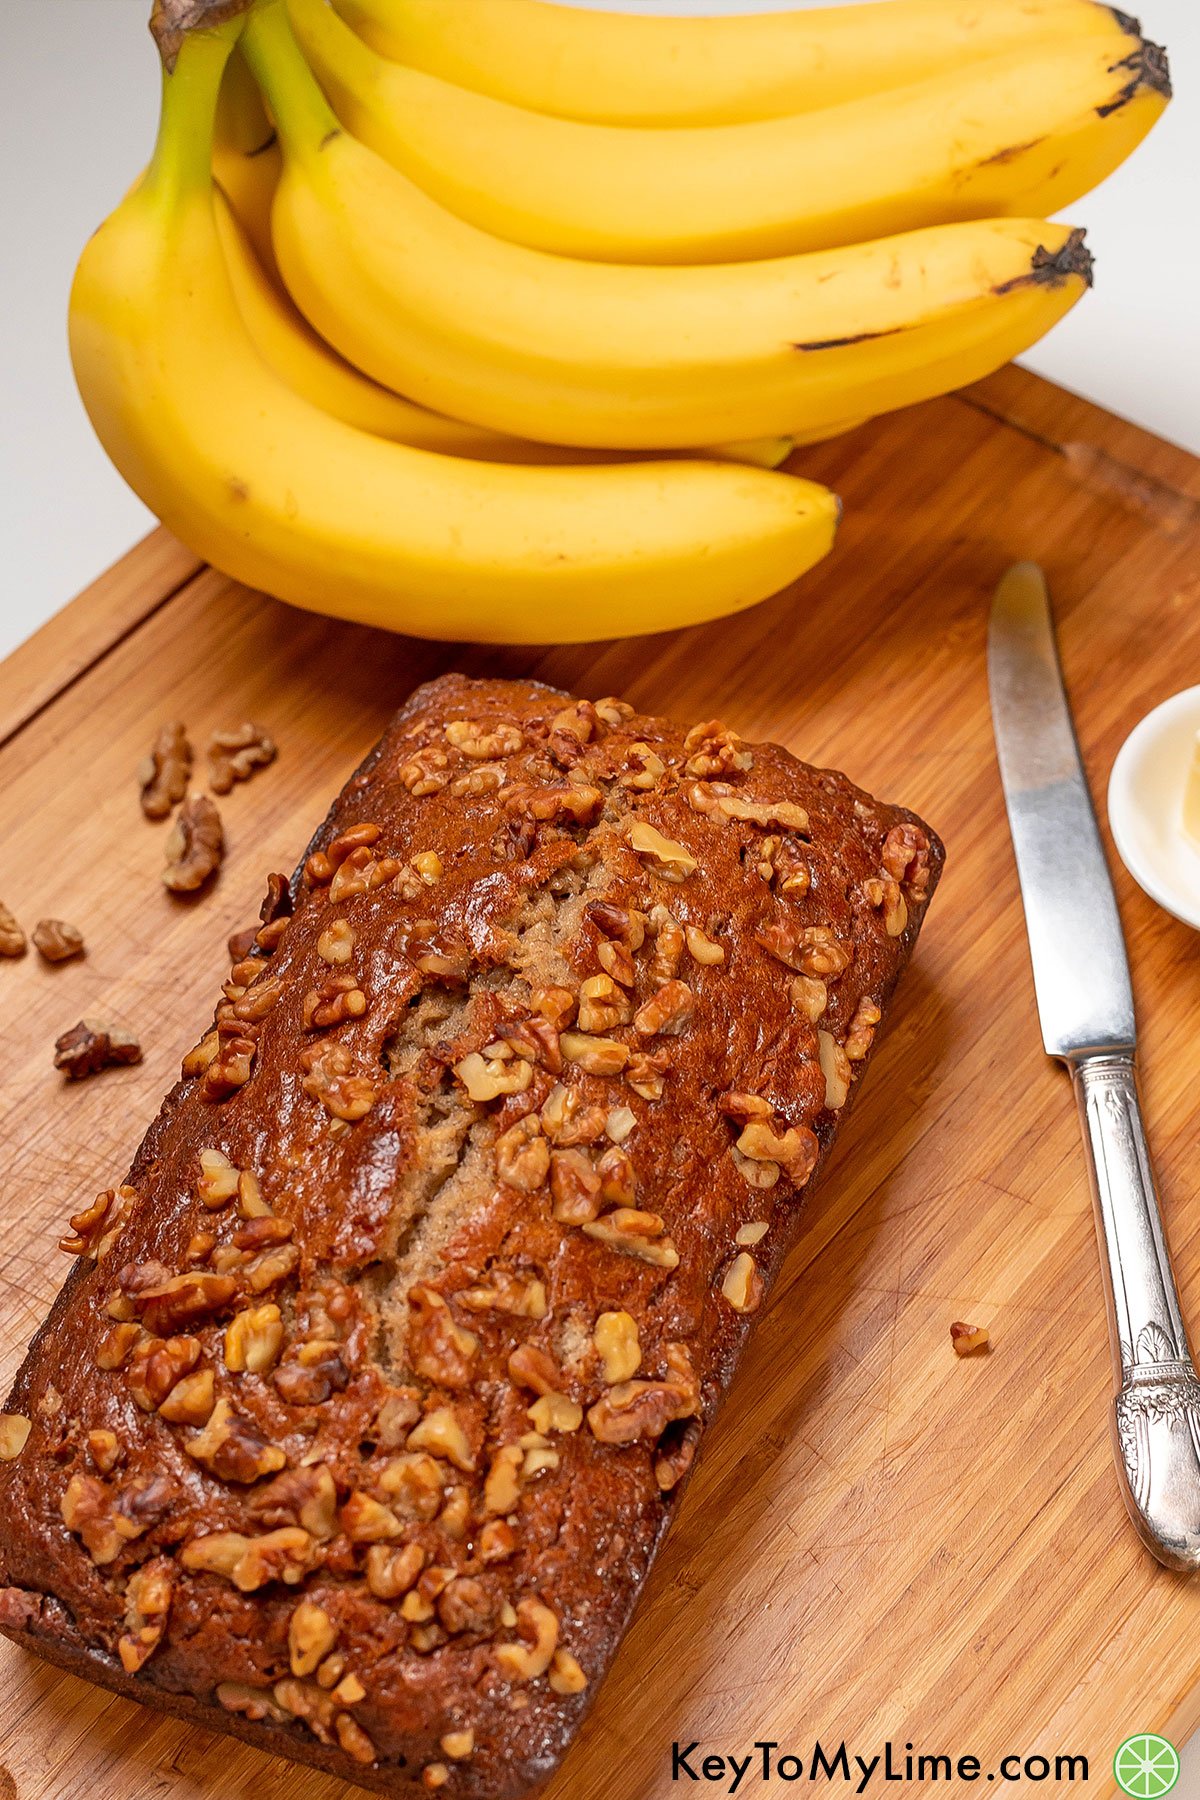 A whole banana bread loaf on a cutting board topped with golden brown walnuts.